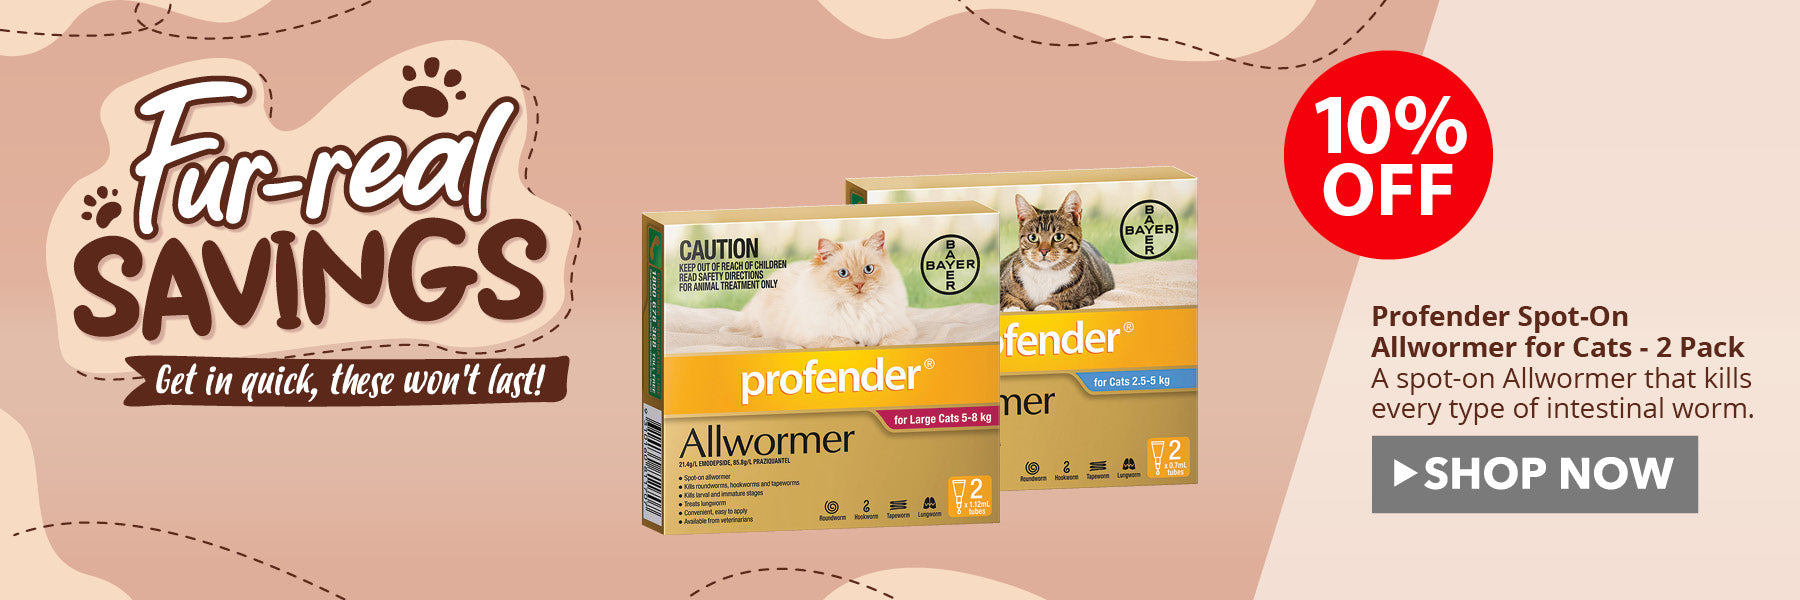 Profender All Wormer for Cats ON SALE NOW